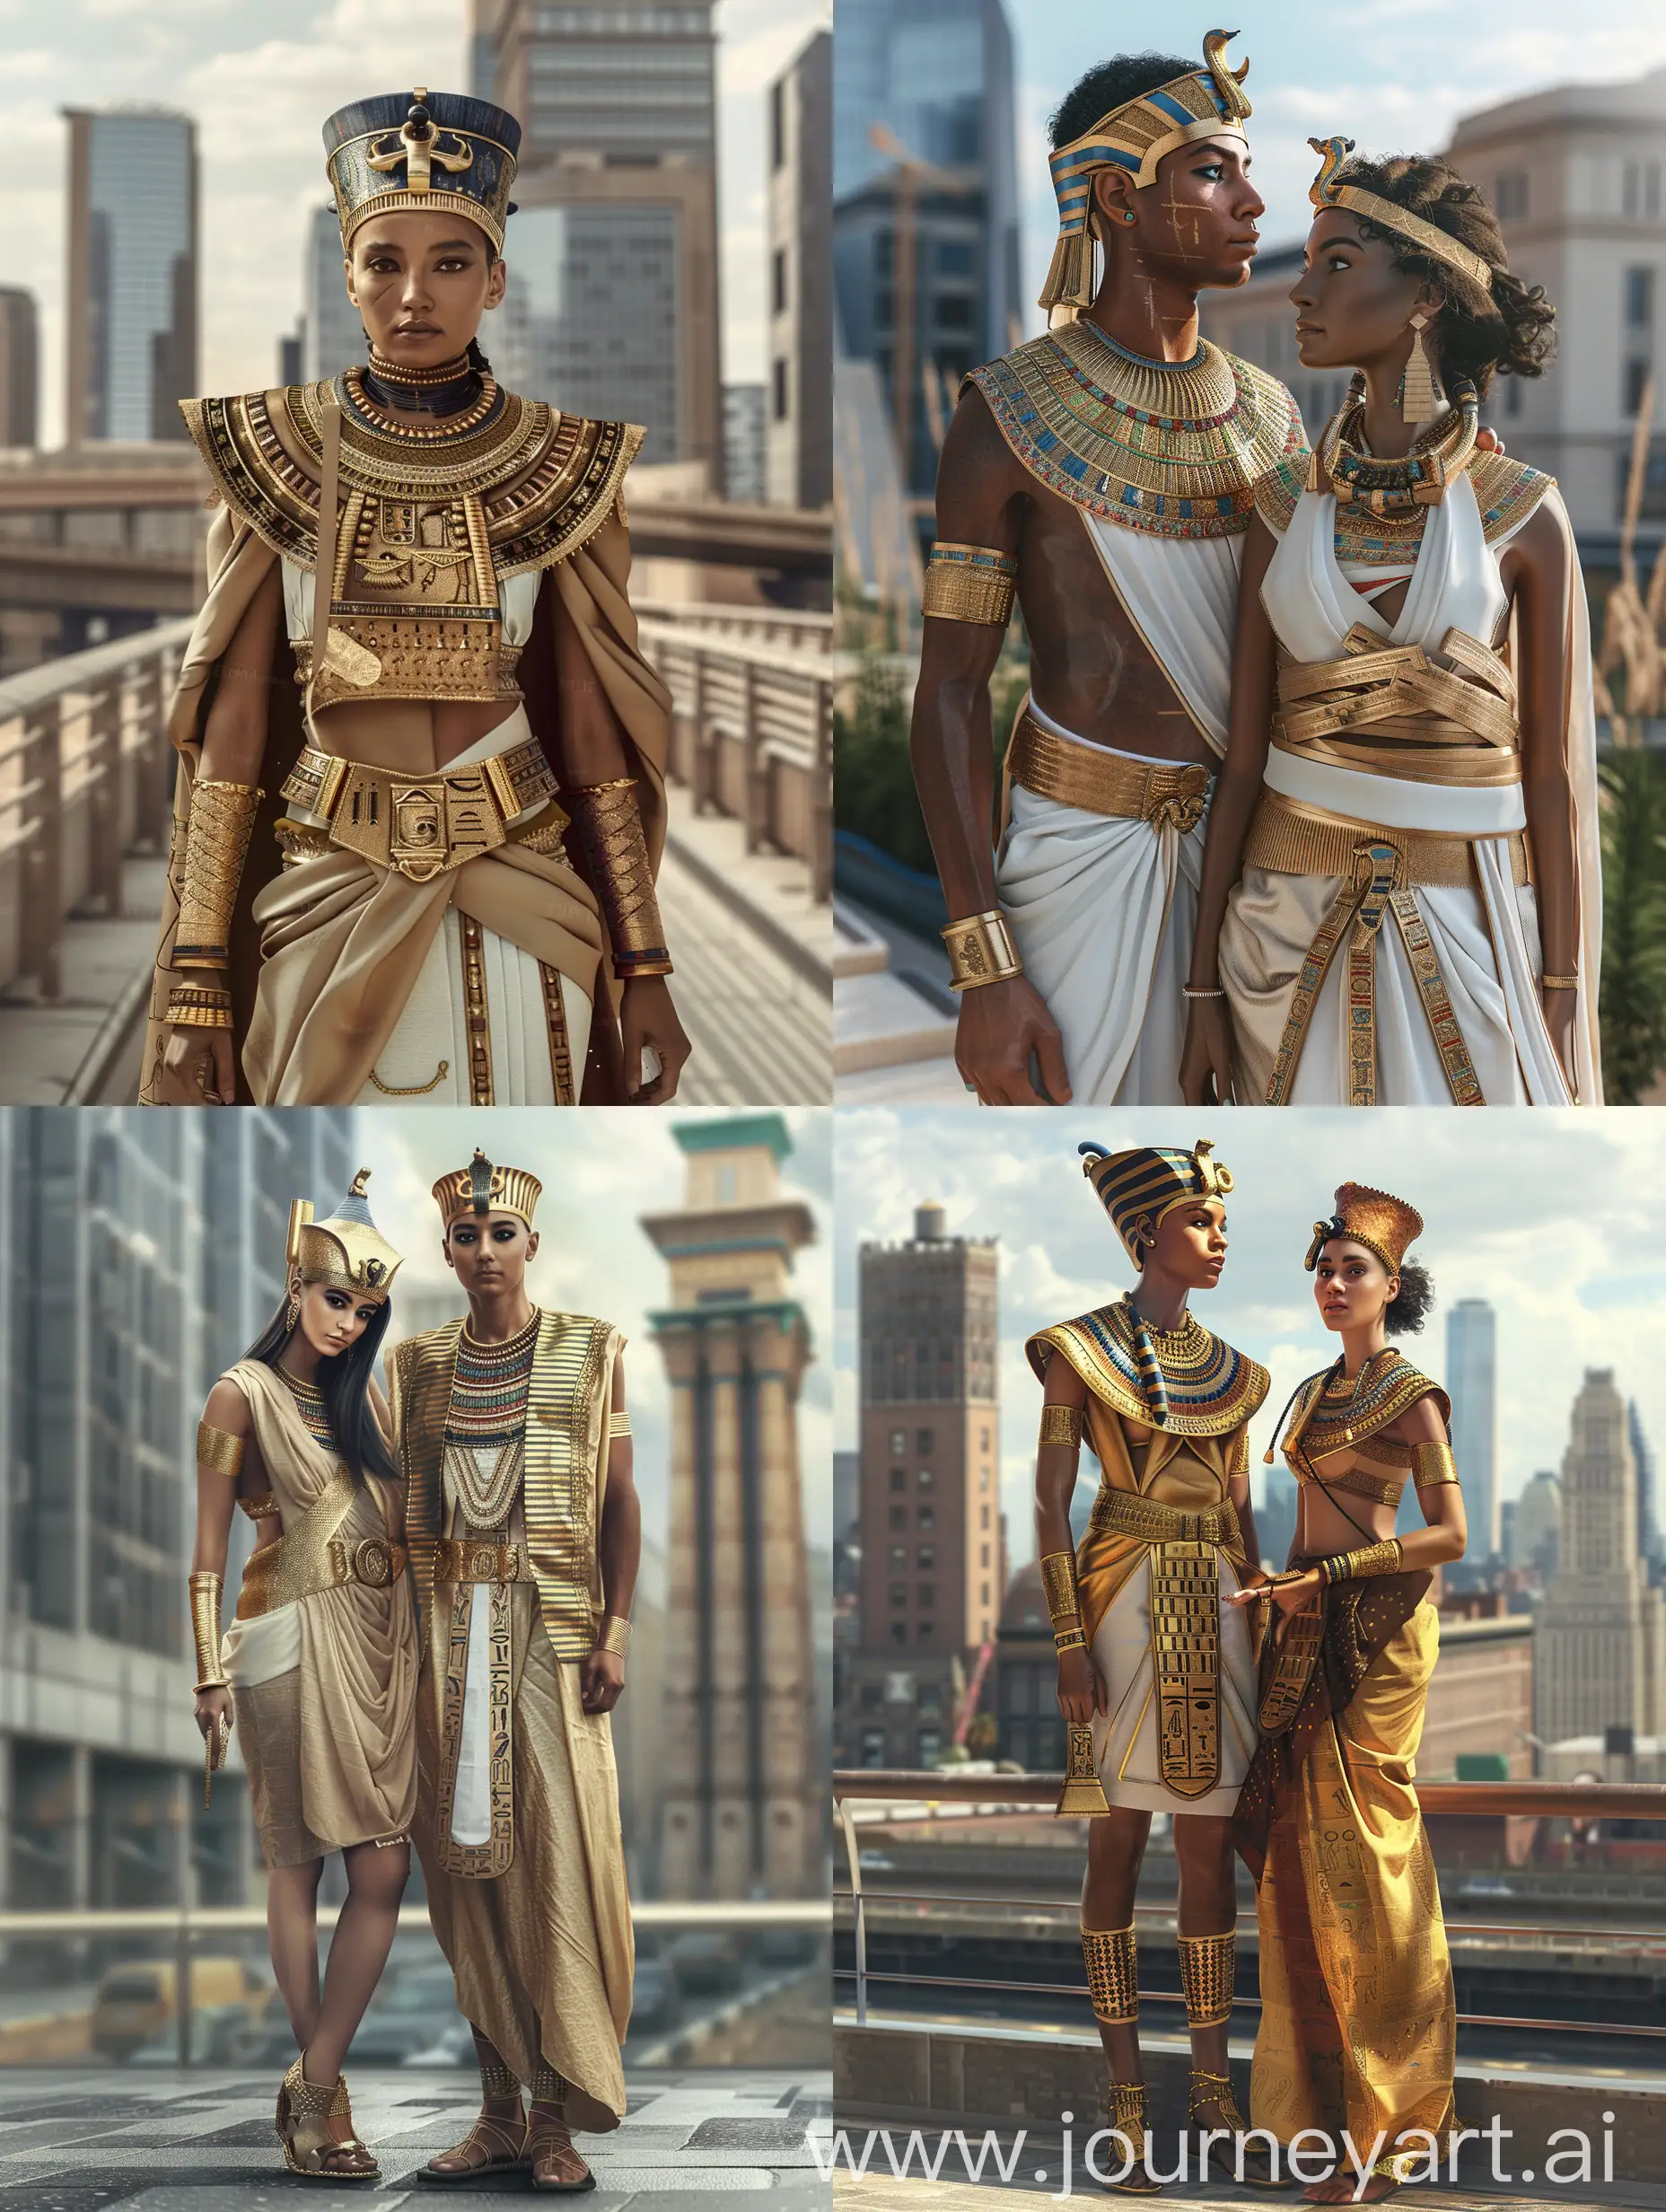 A realistic image seamlessly blending elements of ancient Egyptian royalty with contemporary fashion, featuring individuals adorned in opulent pharaonic attire against the backdrop of a modern urban setting. Employ a juxtaposition of warm desert hues and cool urban tones to convey the fusion of ancient mystique with modern sophistication, highlighting the intricate gold embellishments of the ancient garments alongside sleek, modern accessories